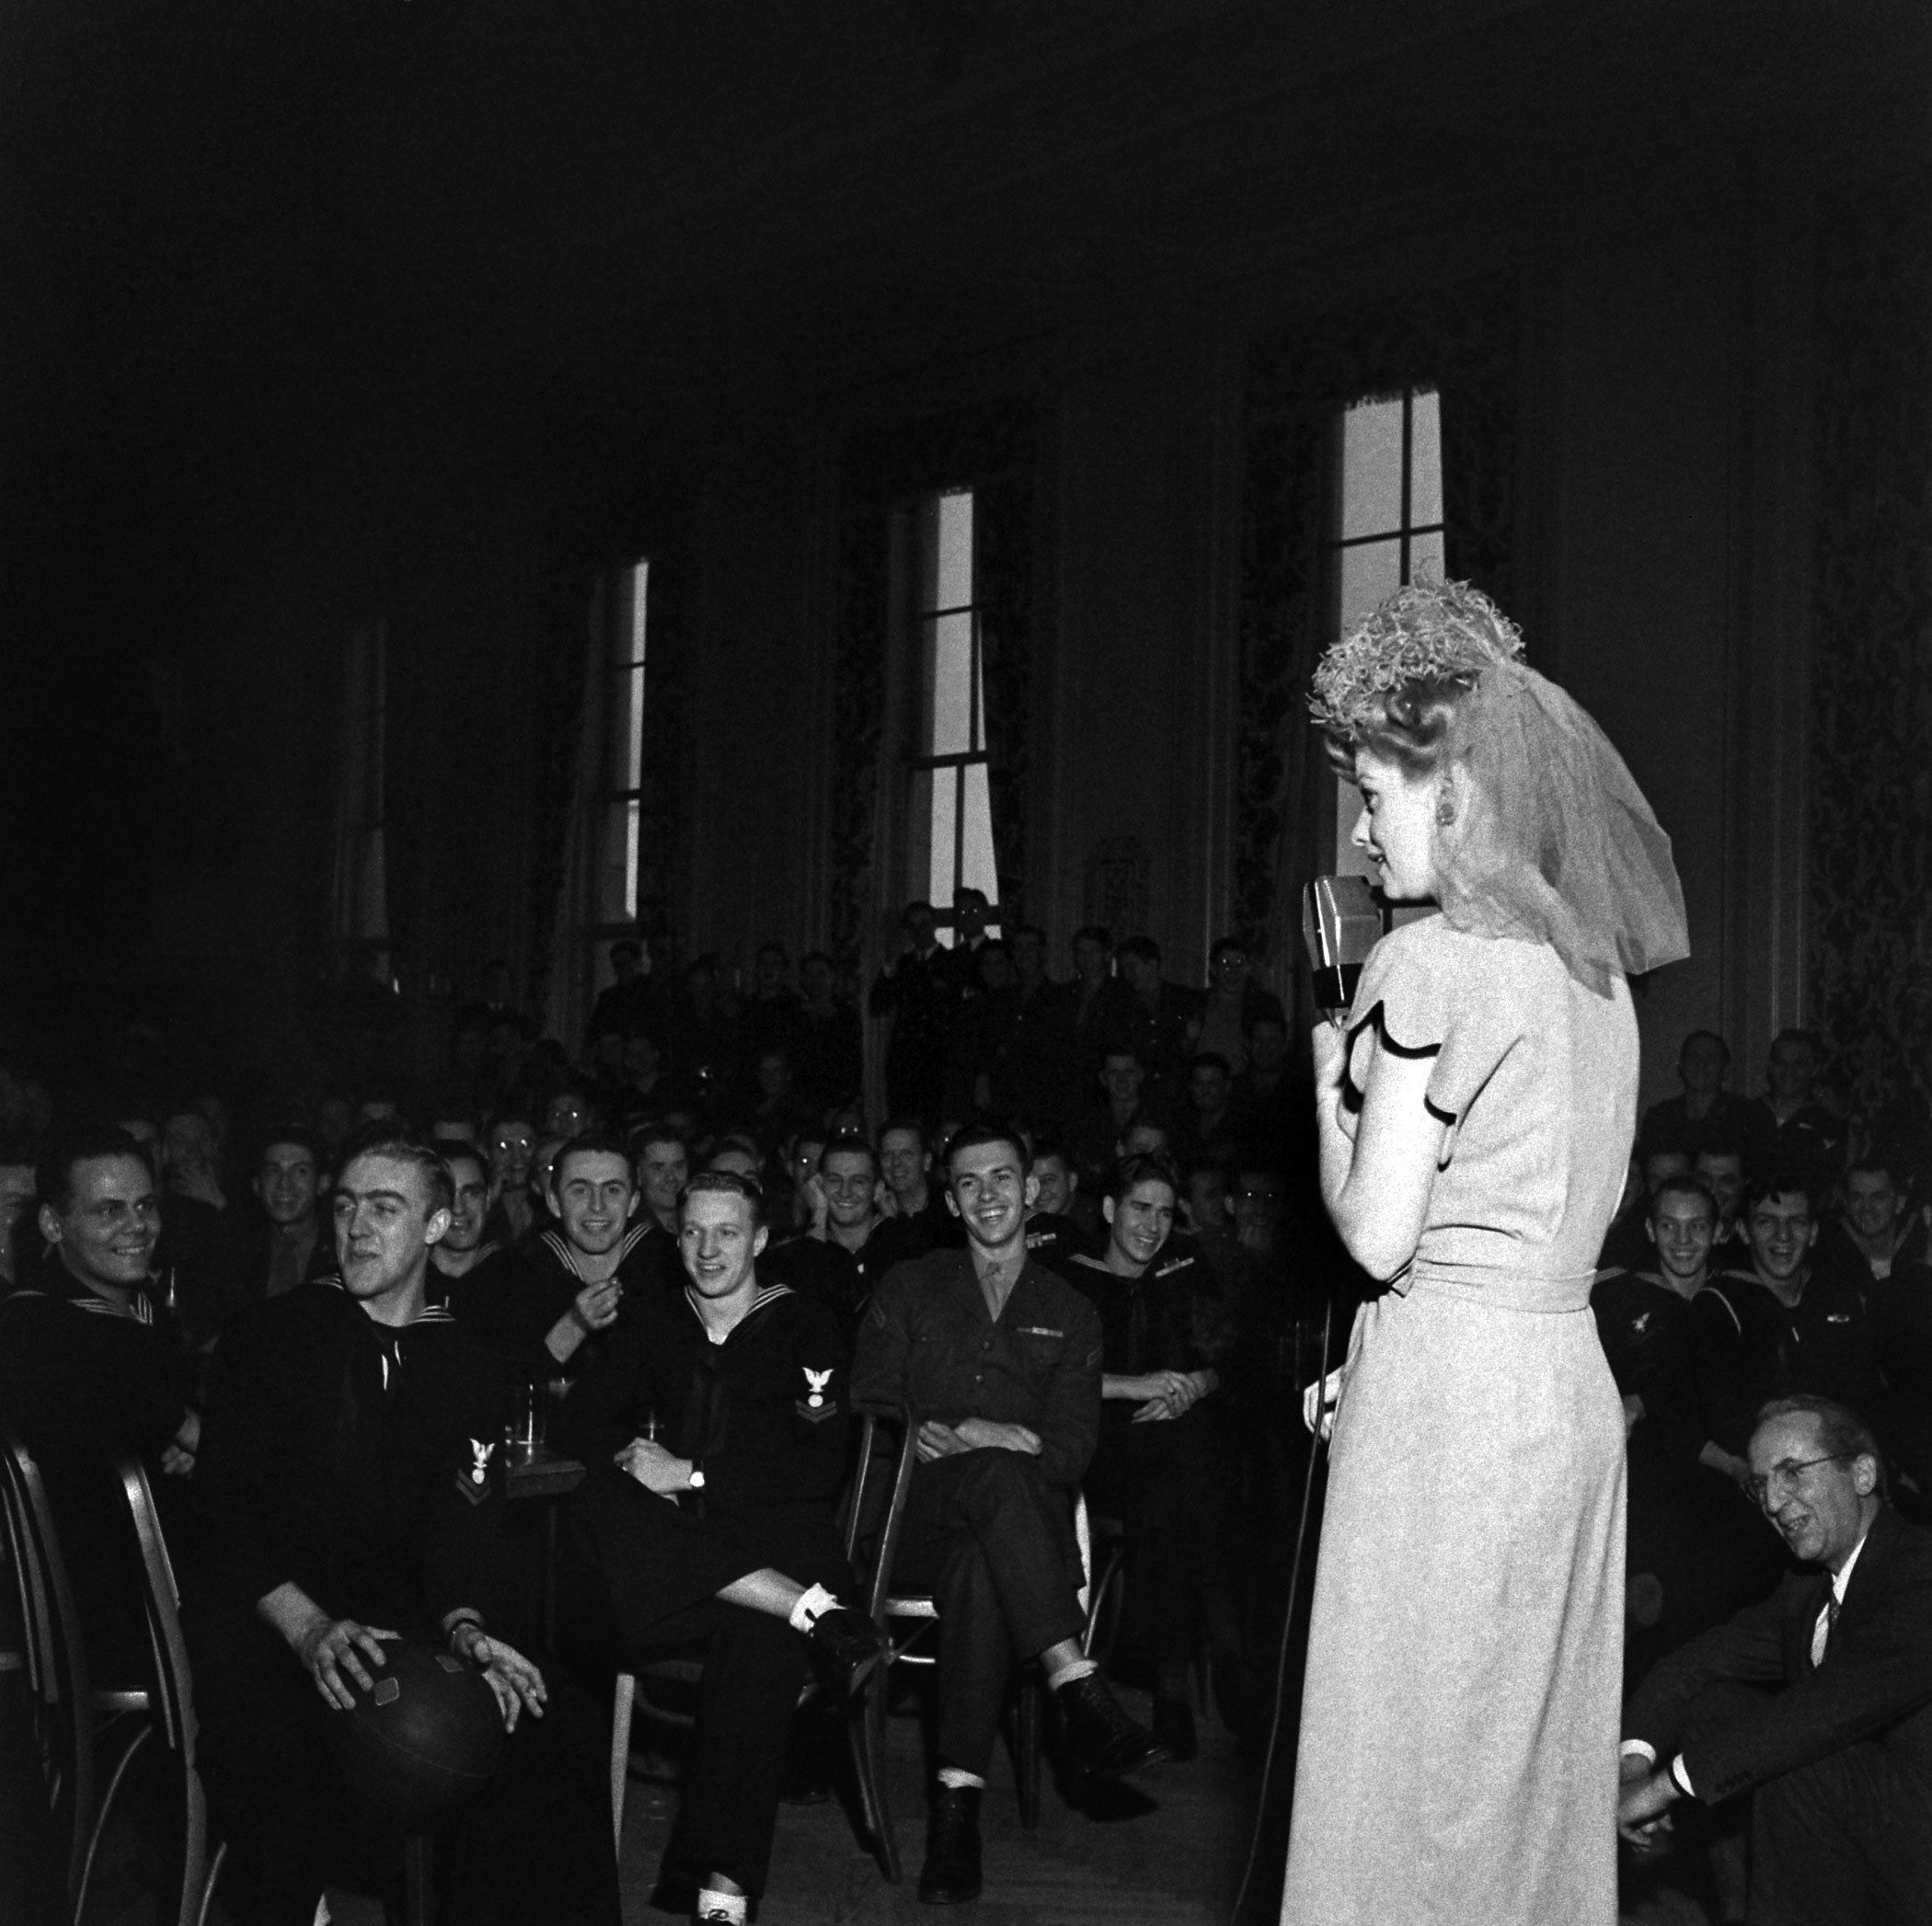 Lucille Ball performs at one of the gala balls in Washington marking President Franklin D. Roosevelt's birthday in January 1944.